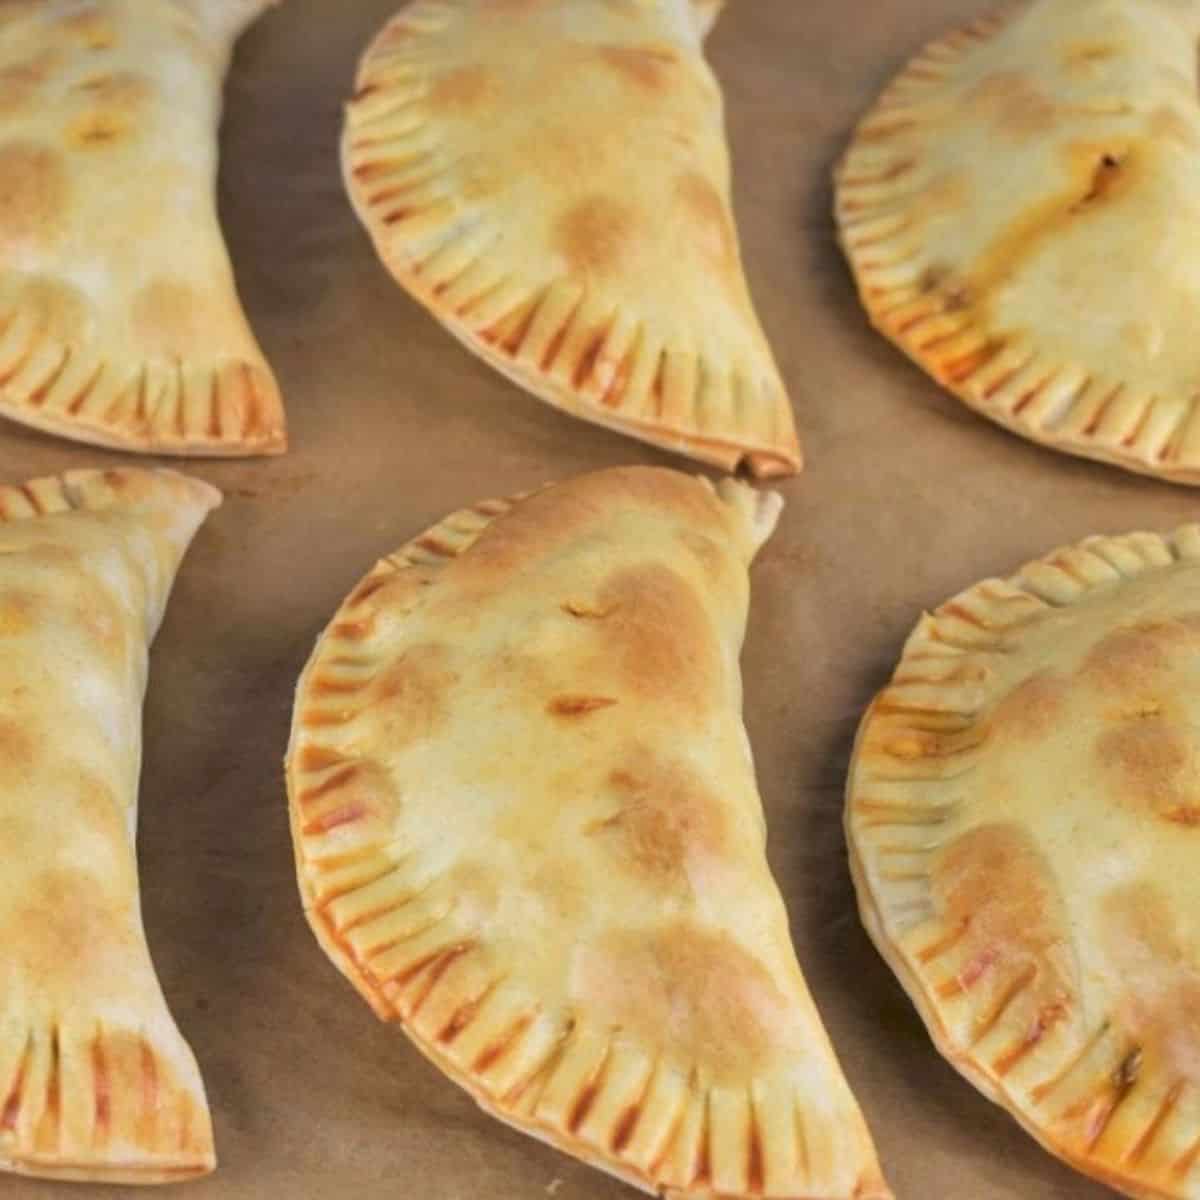 Baked Beef Empanadas arranged on a parchment paper lined baking sheet.